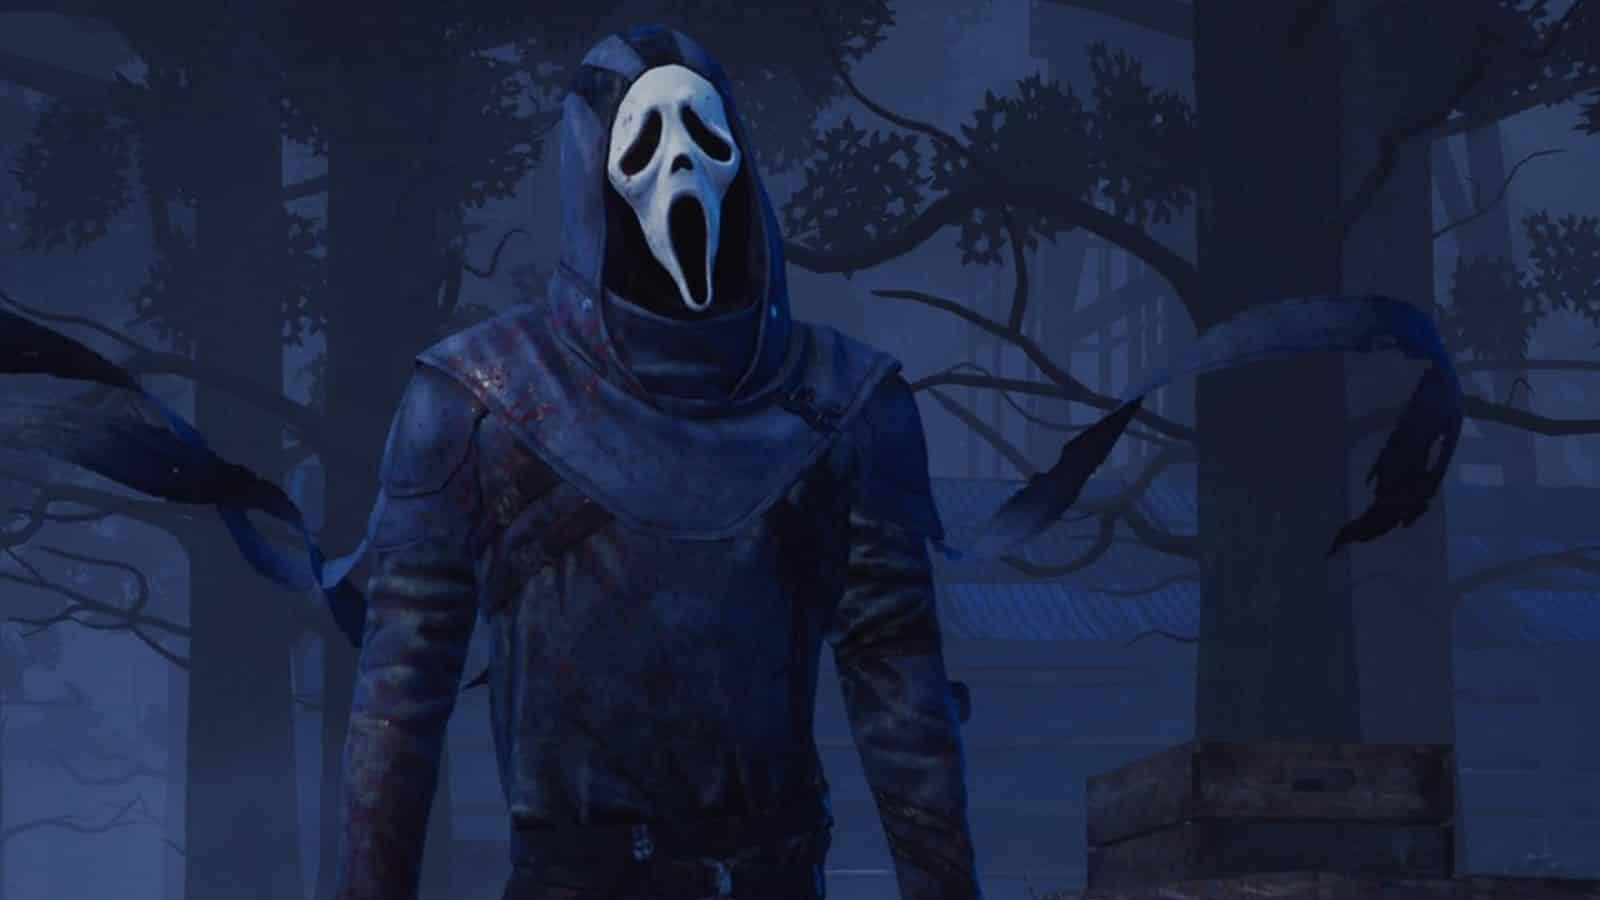 The Ghostface, one of the Killers in Dead by Daylight